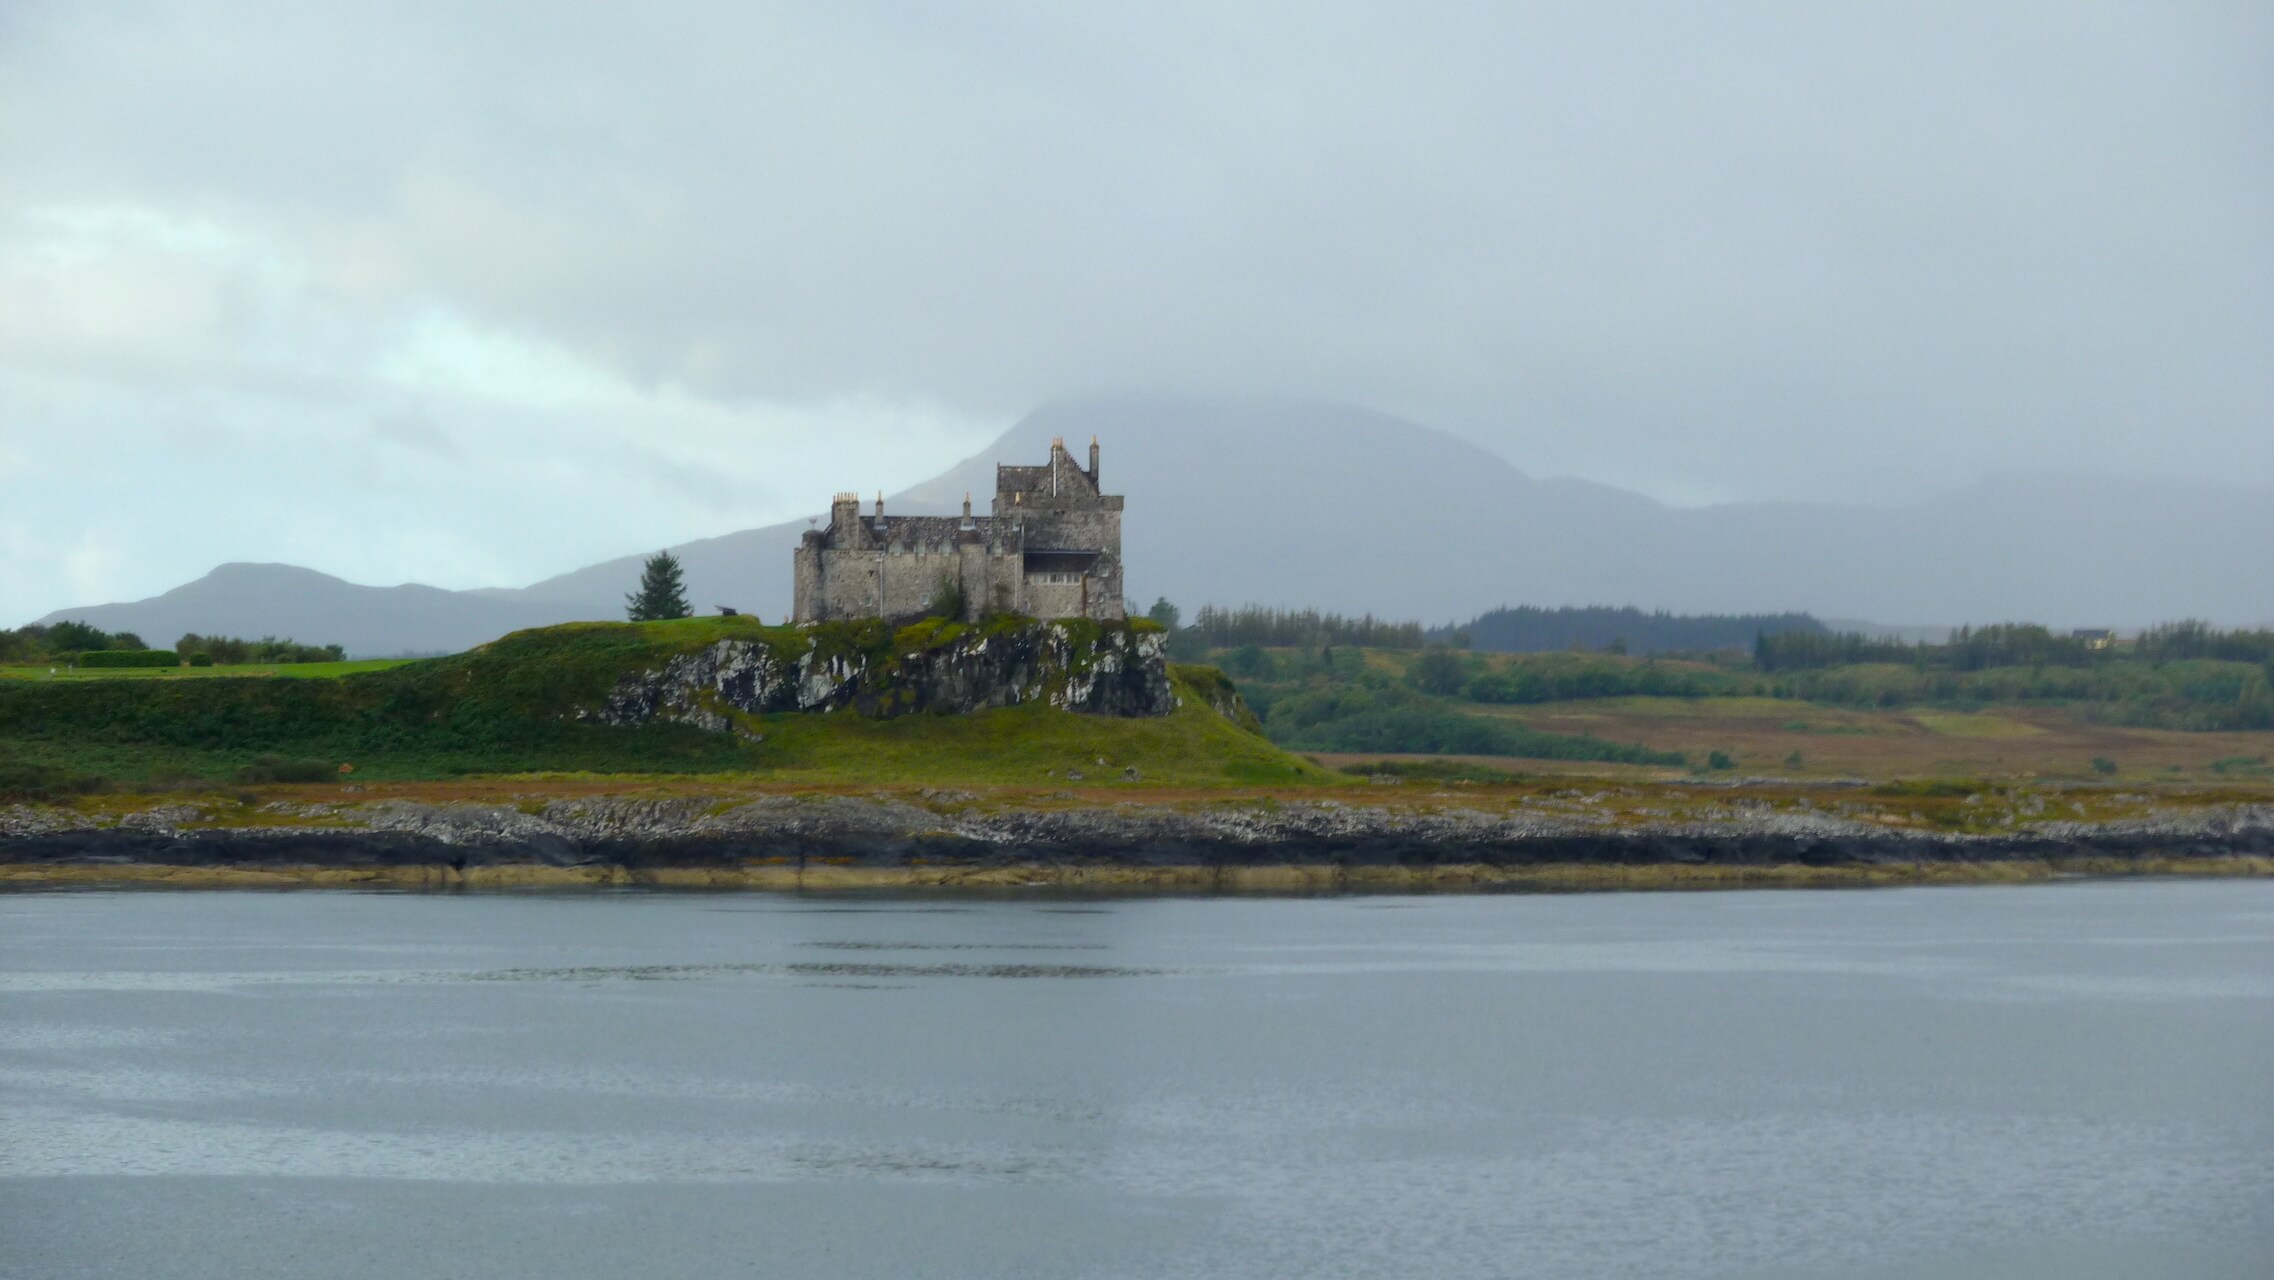 View of Duart Castle from the Oban to Isle of Mull Ferry as it approaches Craignure.